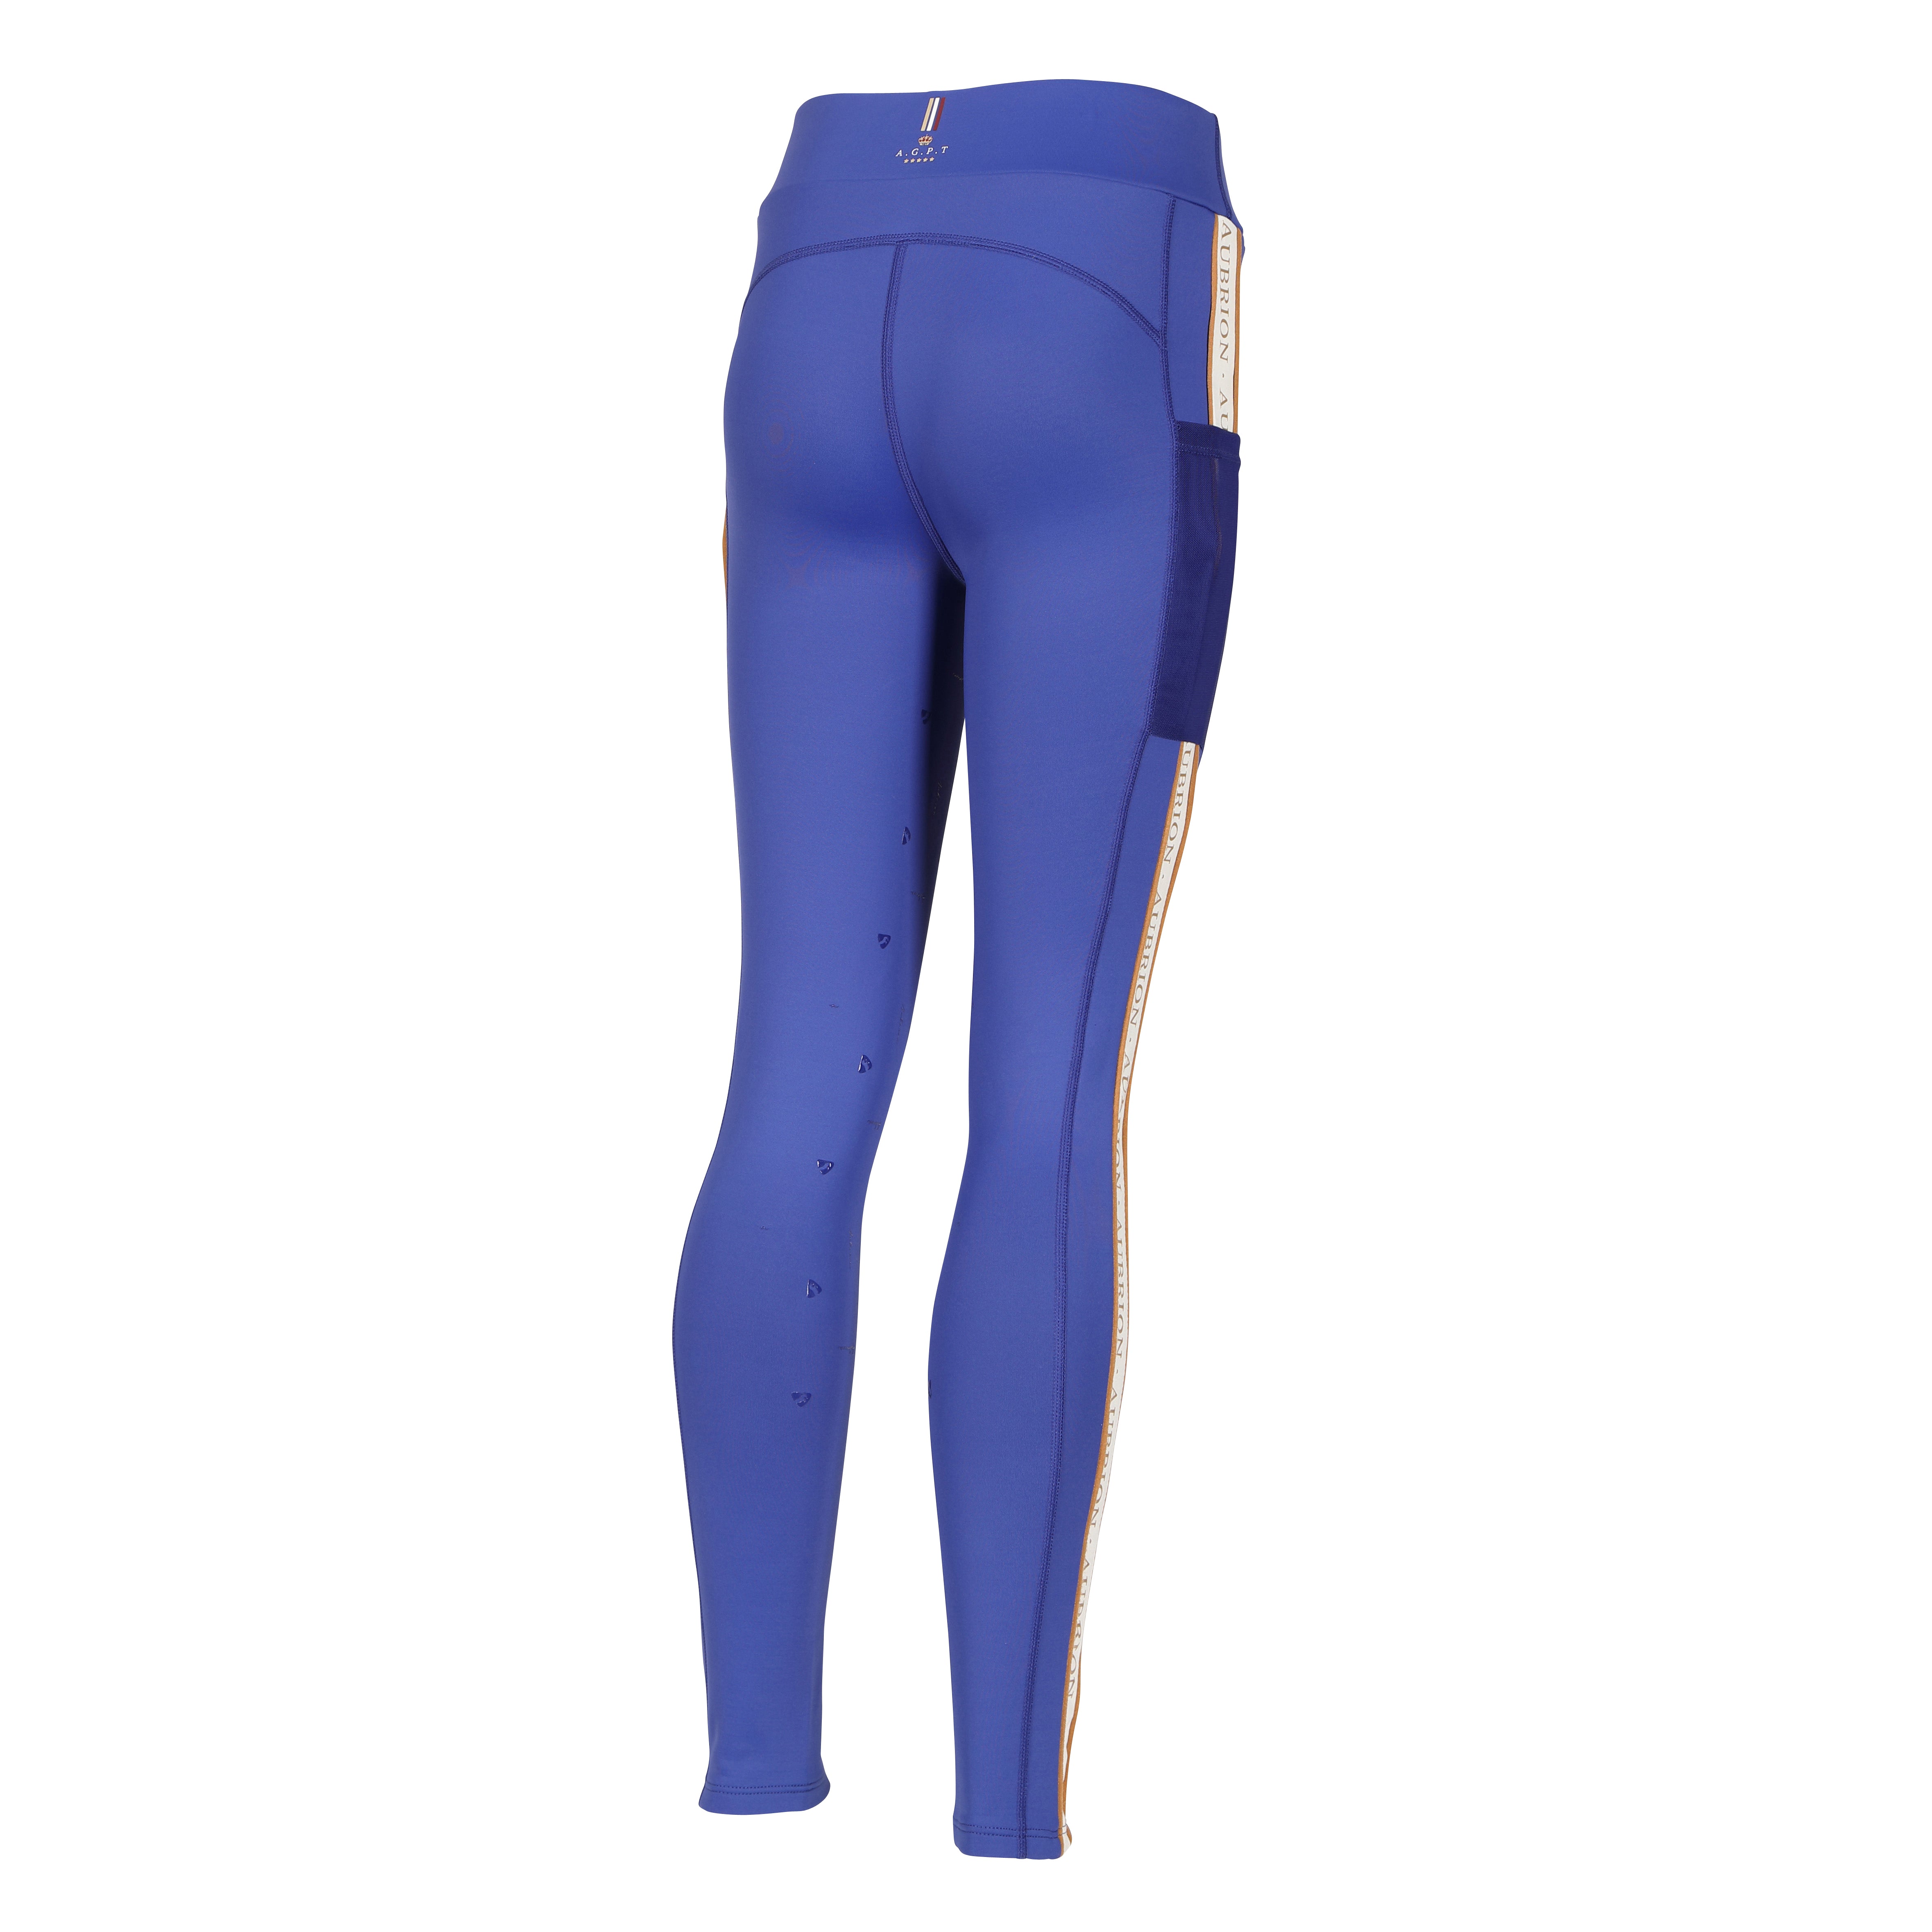 Shires Young Riders Aubrion Team Shield Riding Tights